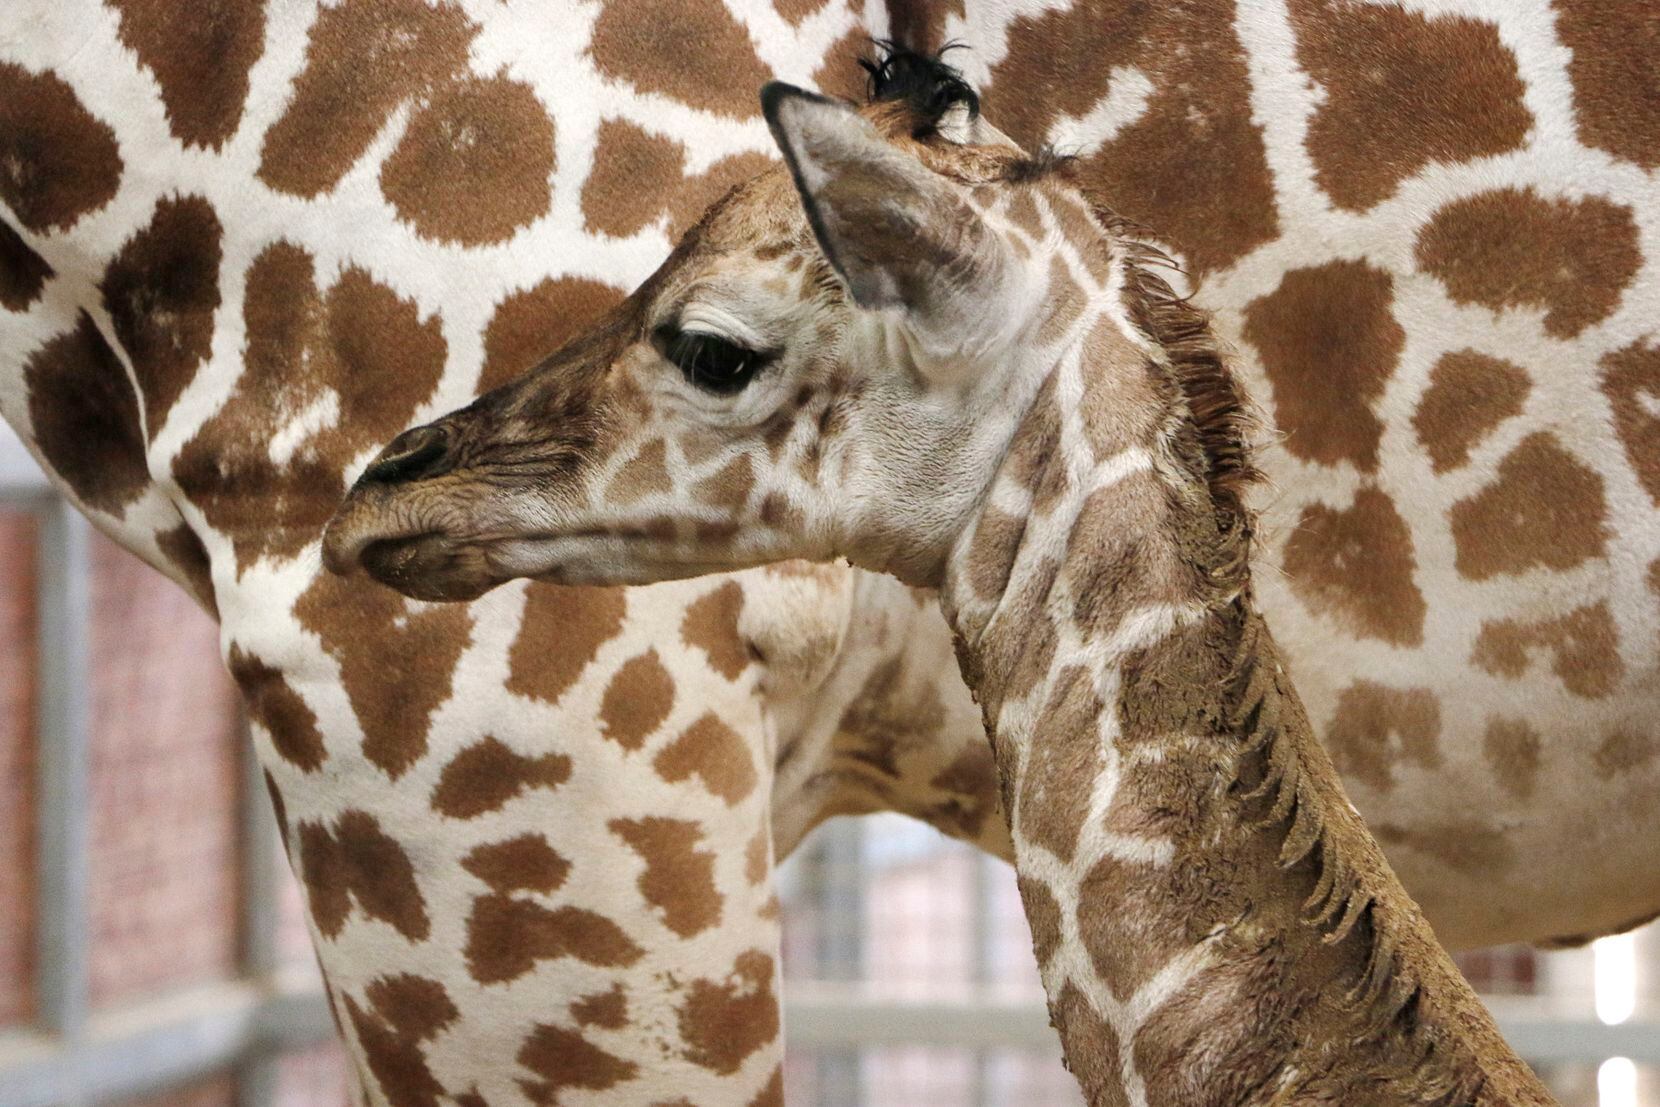 Katie the giraffe gave birth May 30 to a male calf, the zoo's first since 2015.